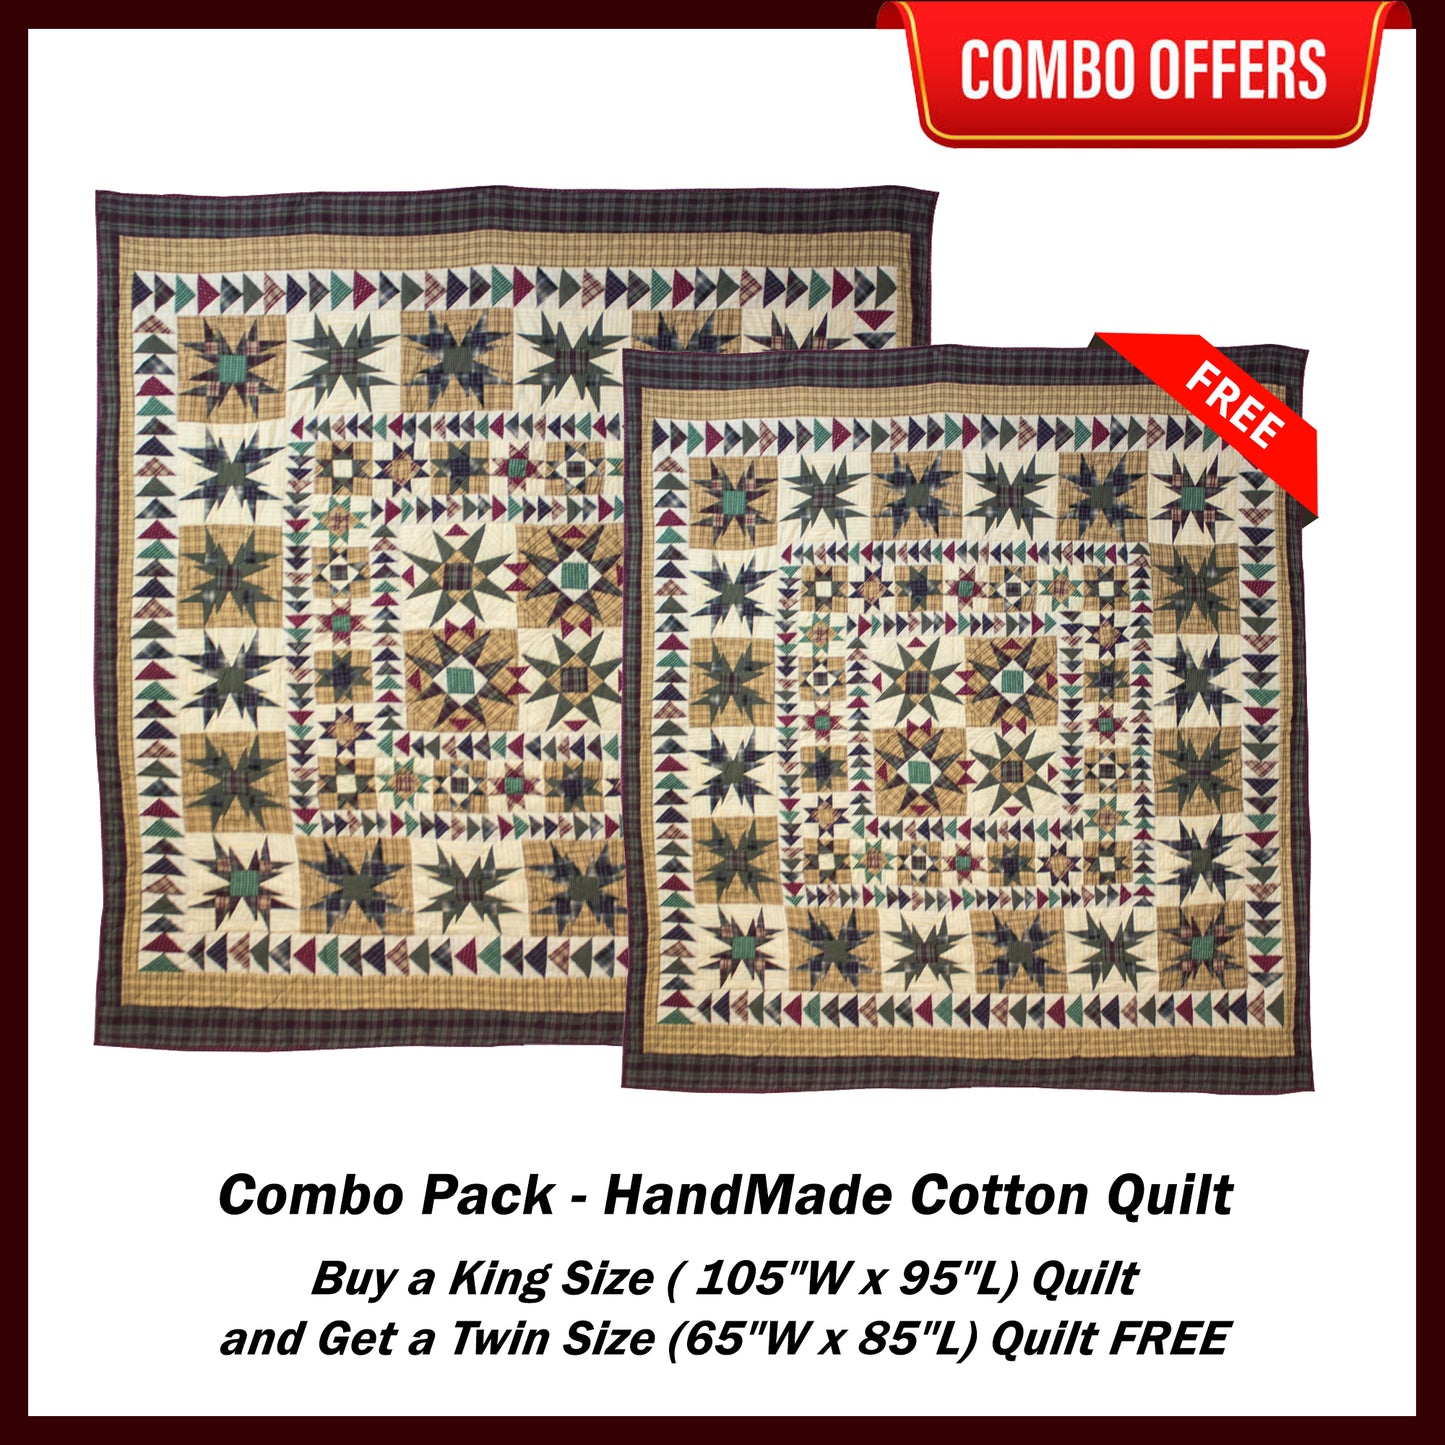 Forever Handmade Cotton Quilt - Buy a King Size Quilt and Get a Twin Size Quilt FREE